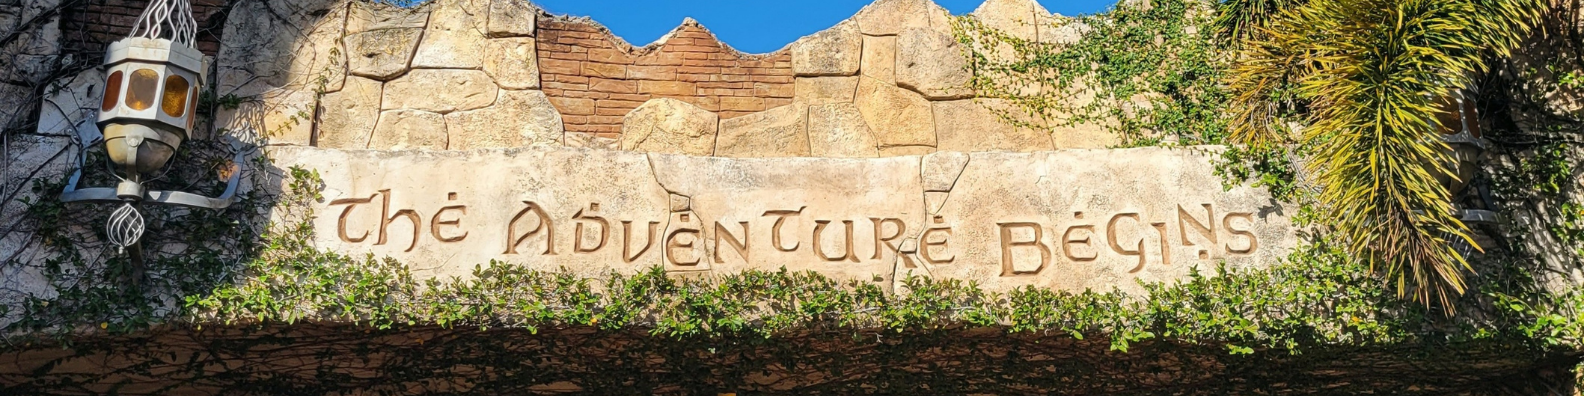 The Top 10 Universal Islands of Adventure Rides